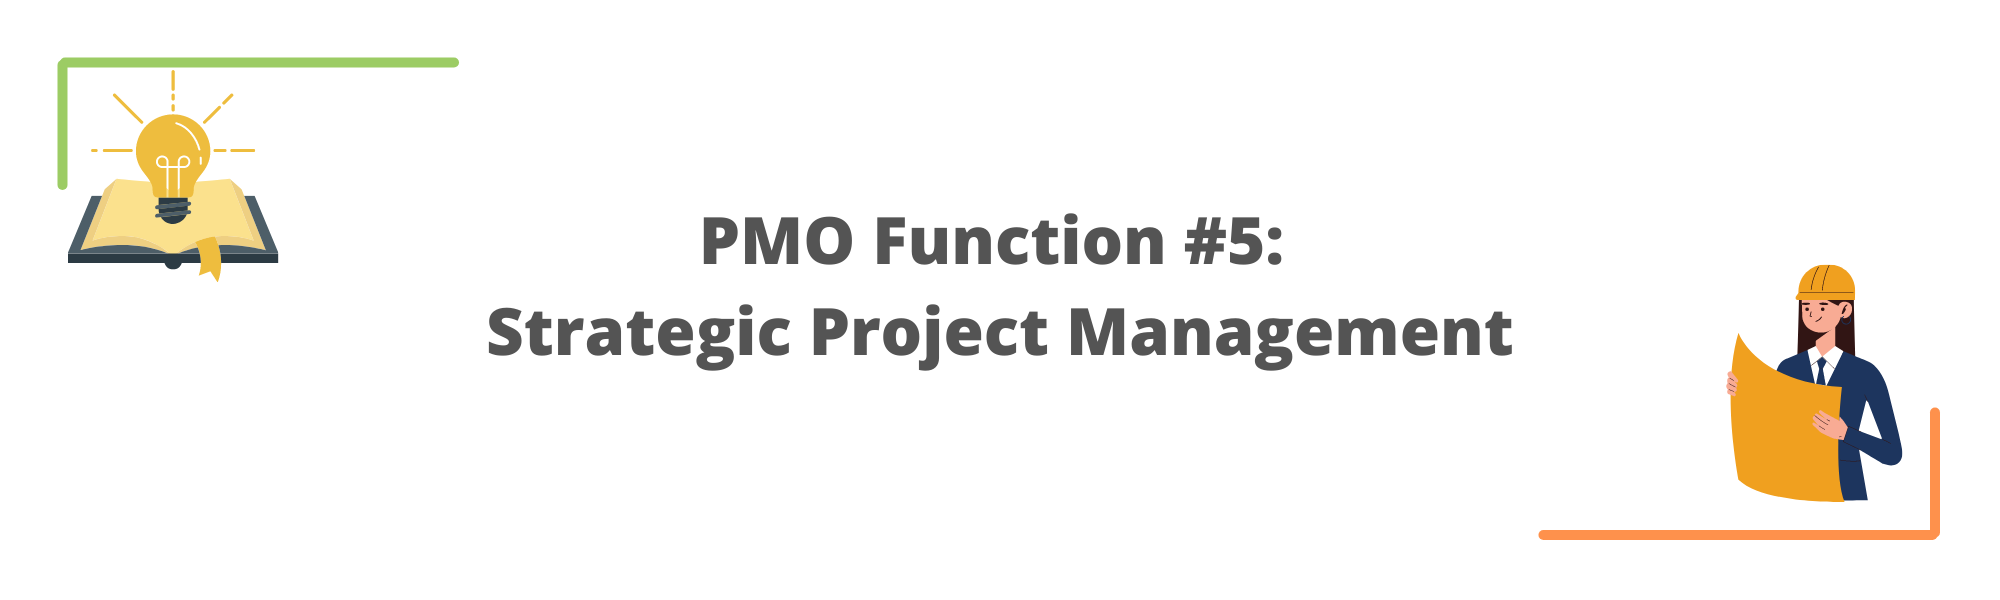 PMO Function #5 - Strategic Project Management